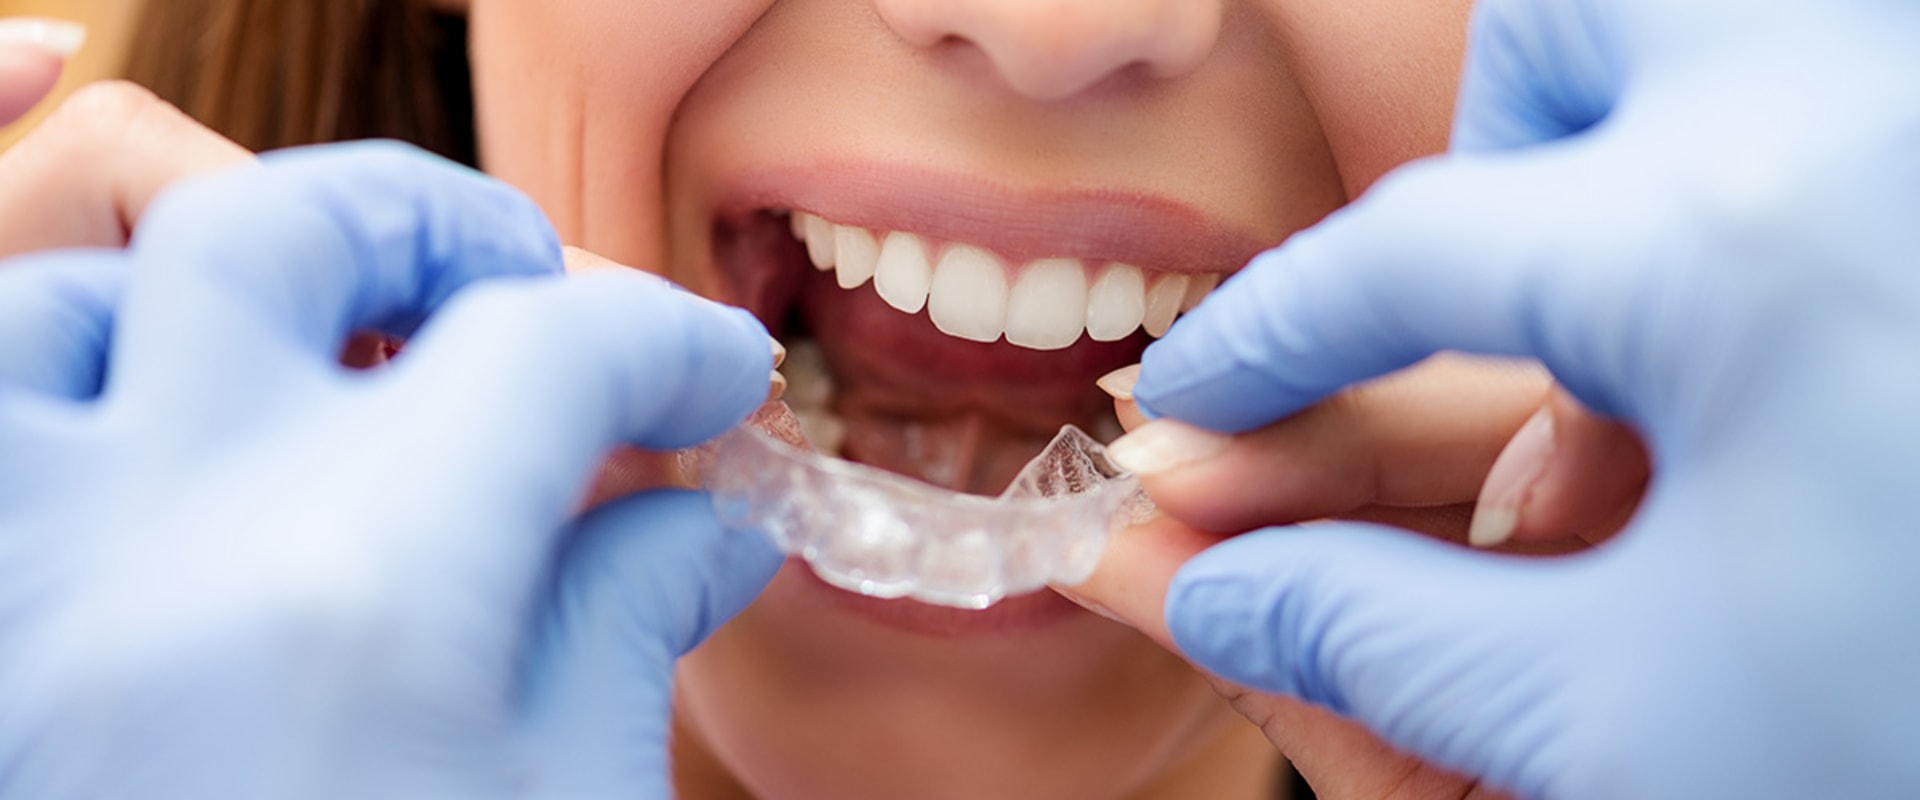 Do Orthodontists Work on Gums?